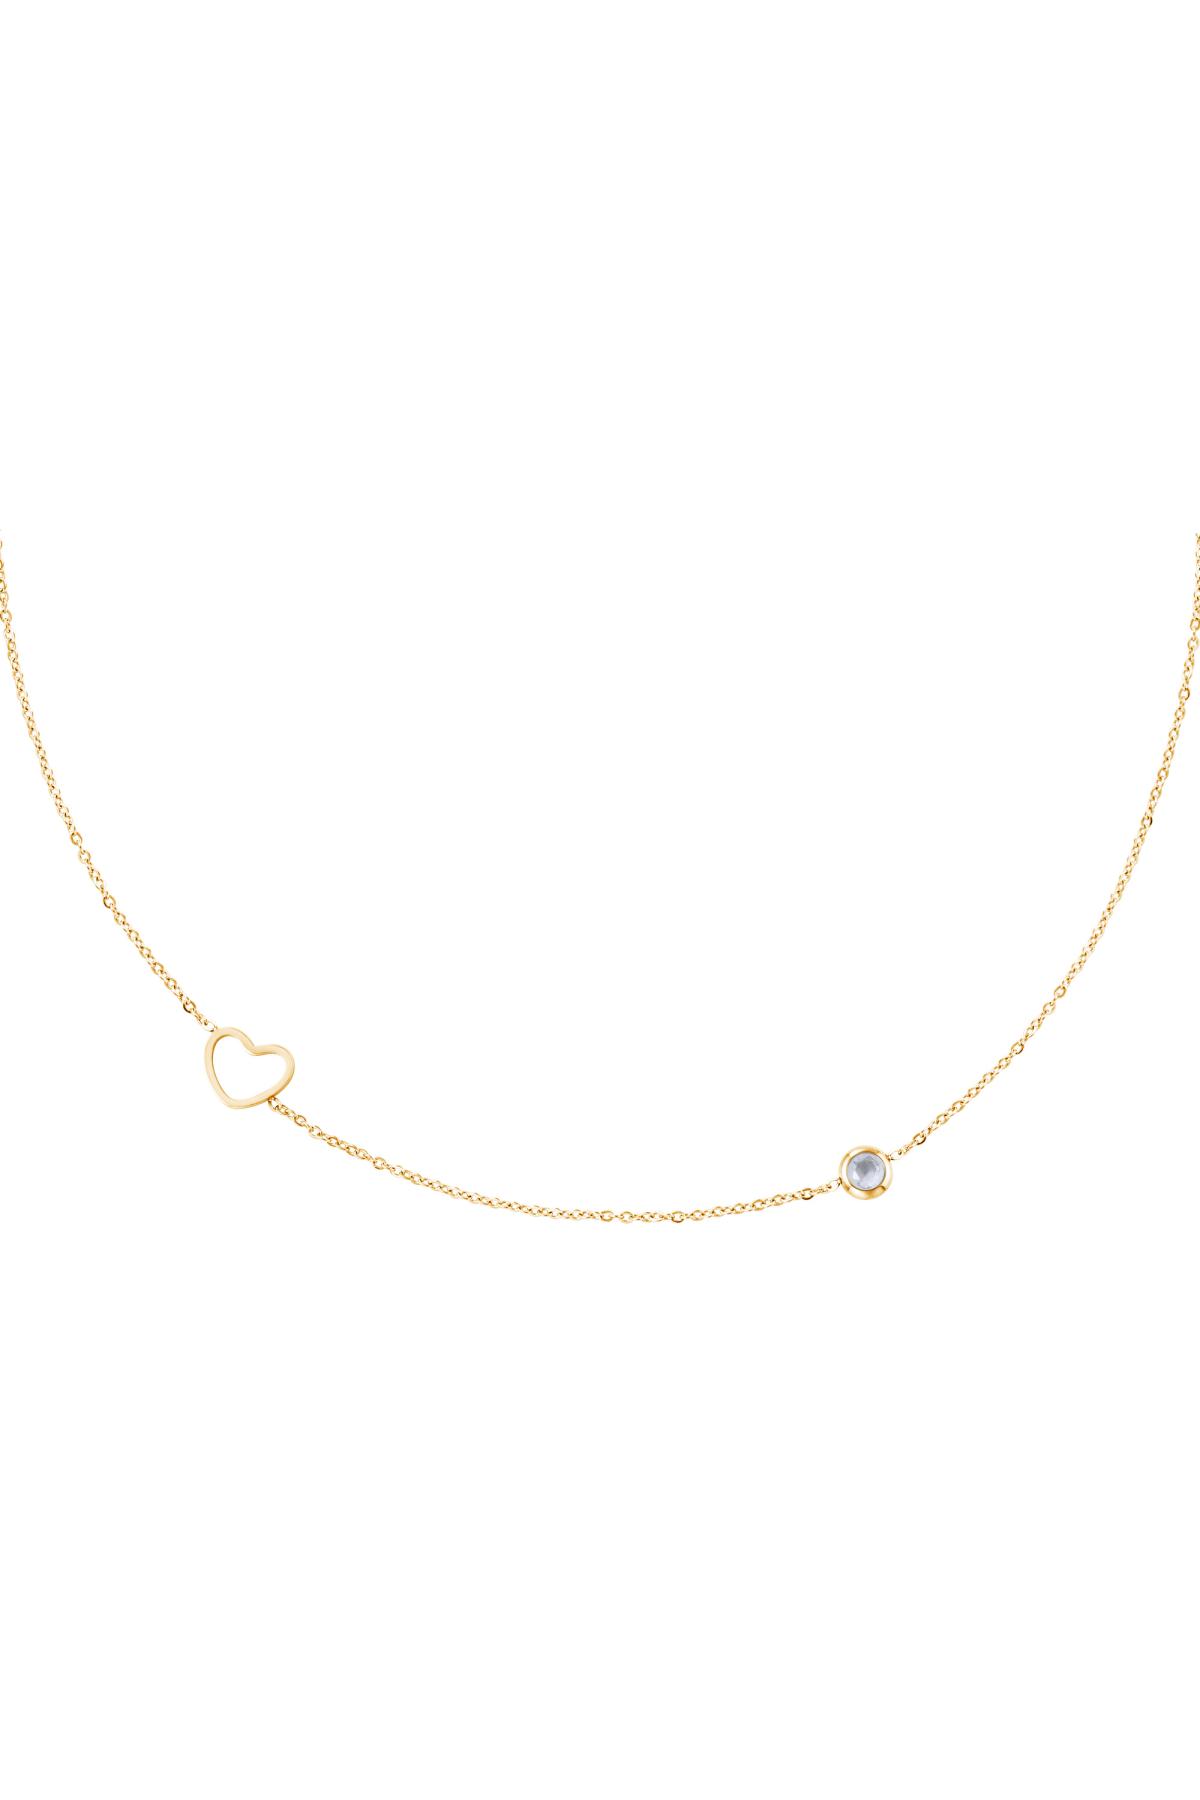 Birthstone necklace June gold Transparent Stainless Steel 